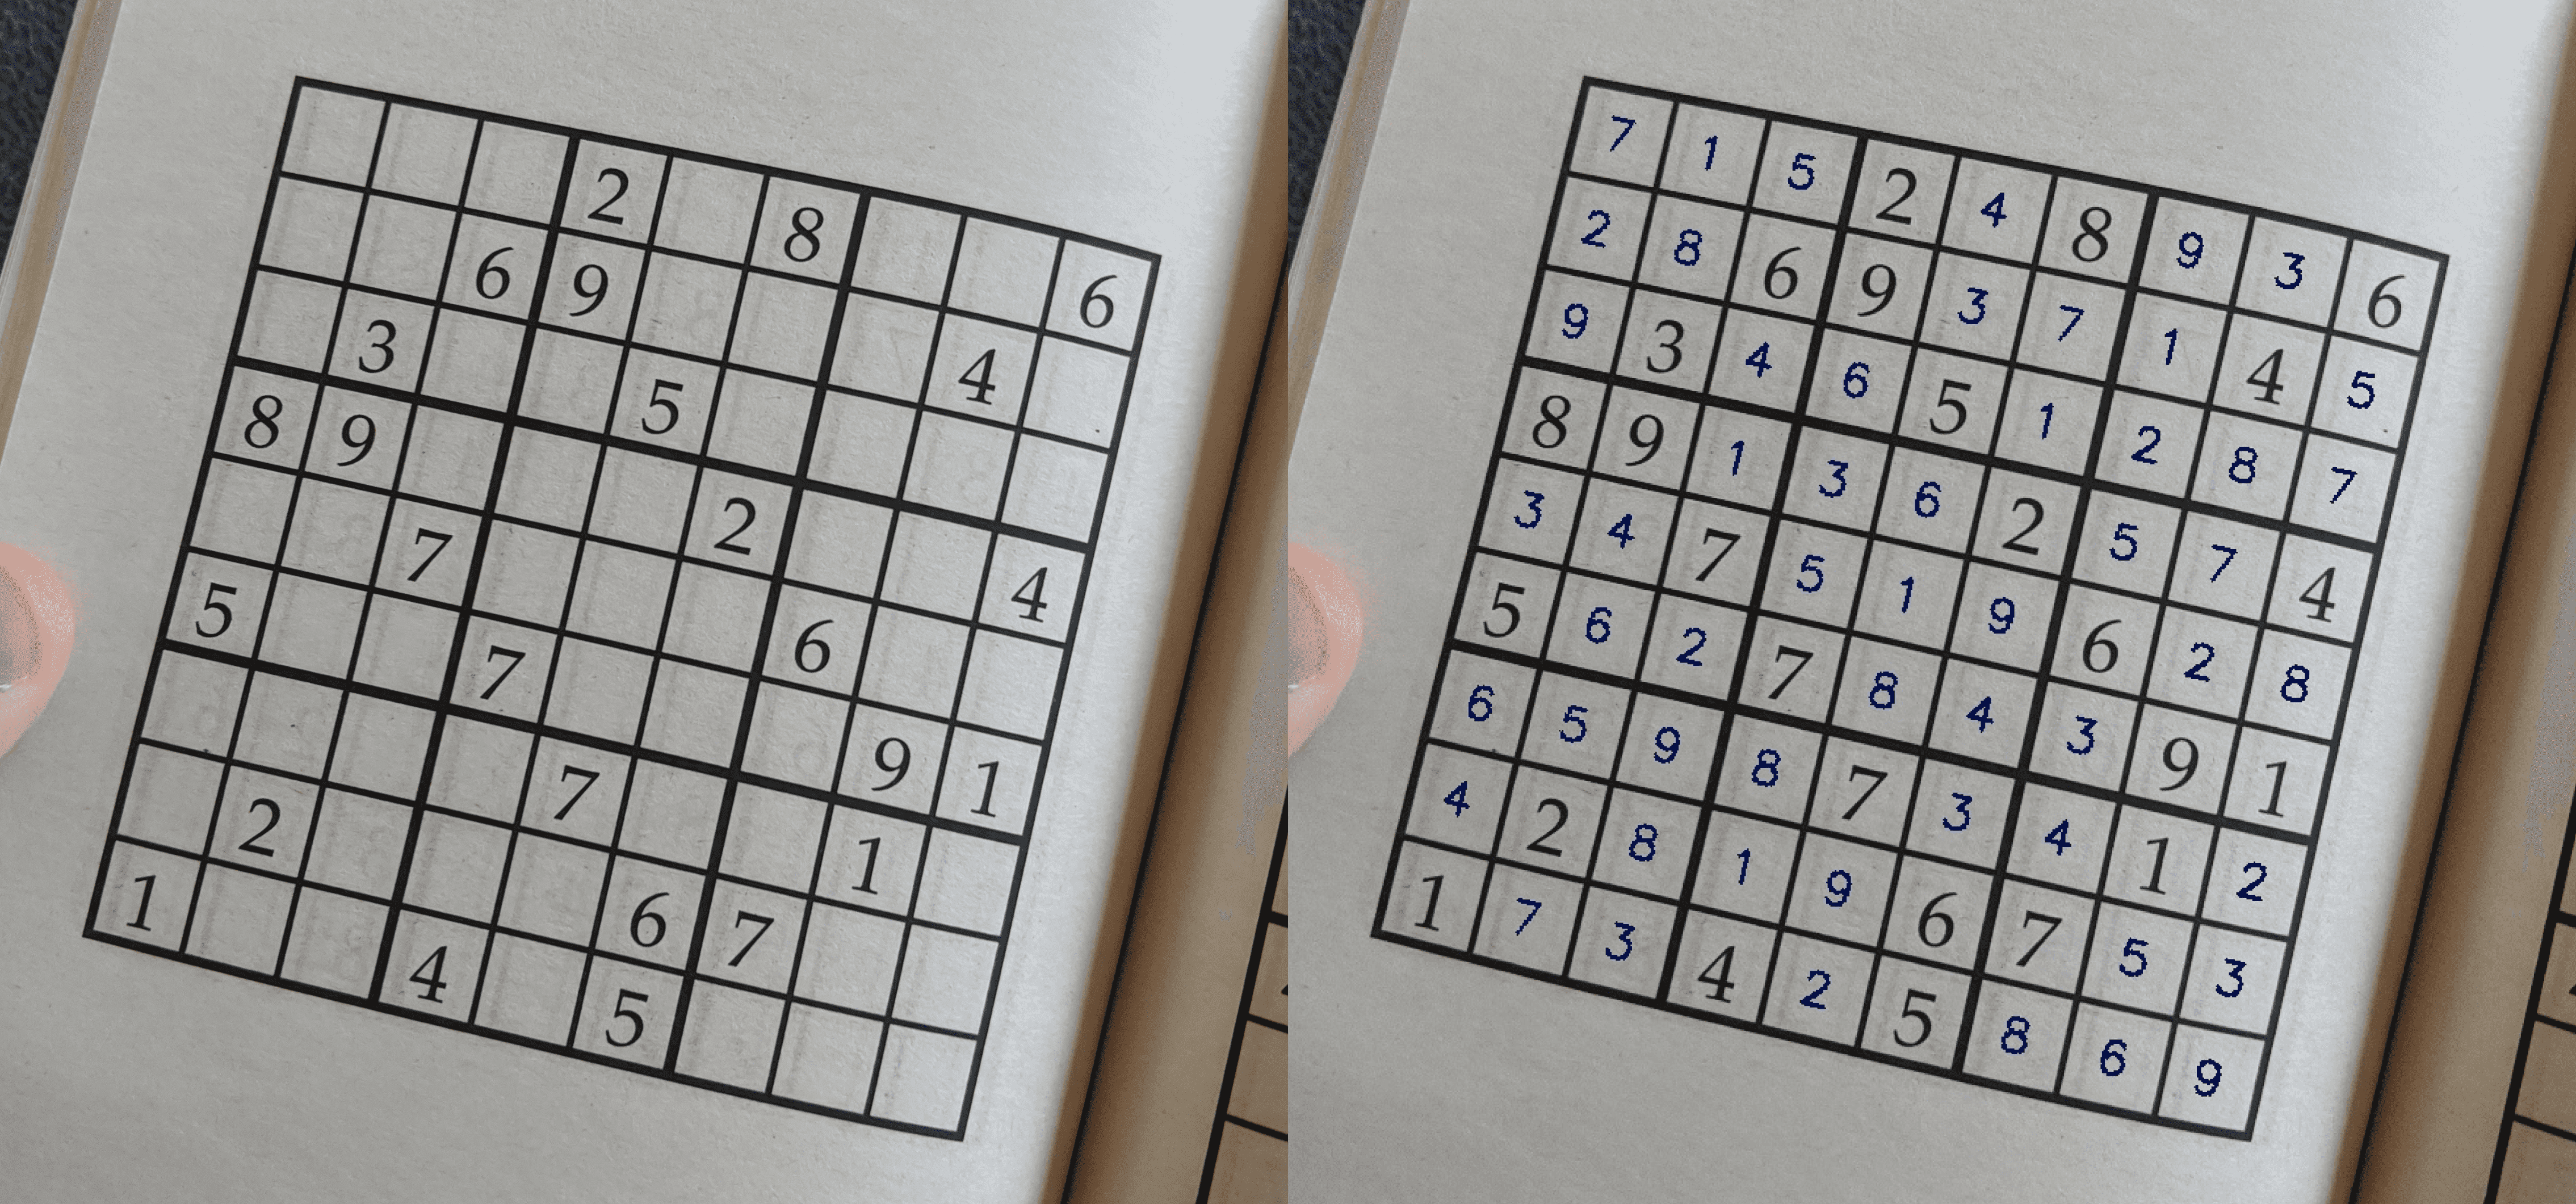 Solving the sudoku and printing the solution in the original image.